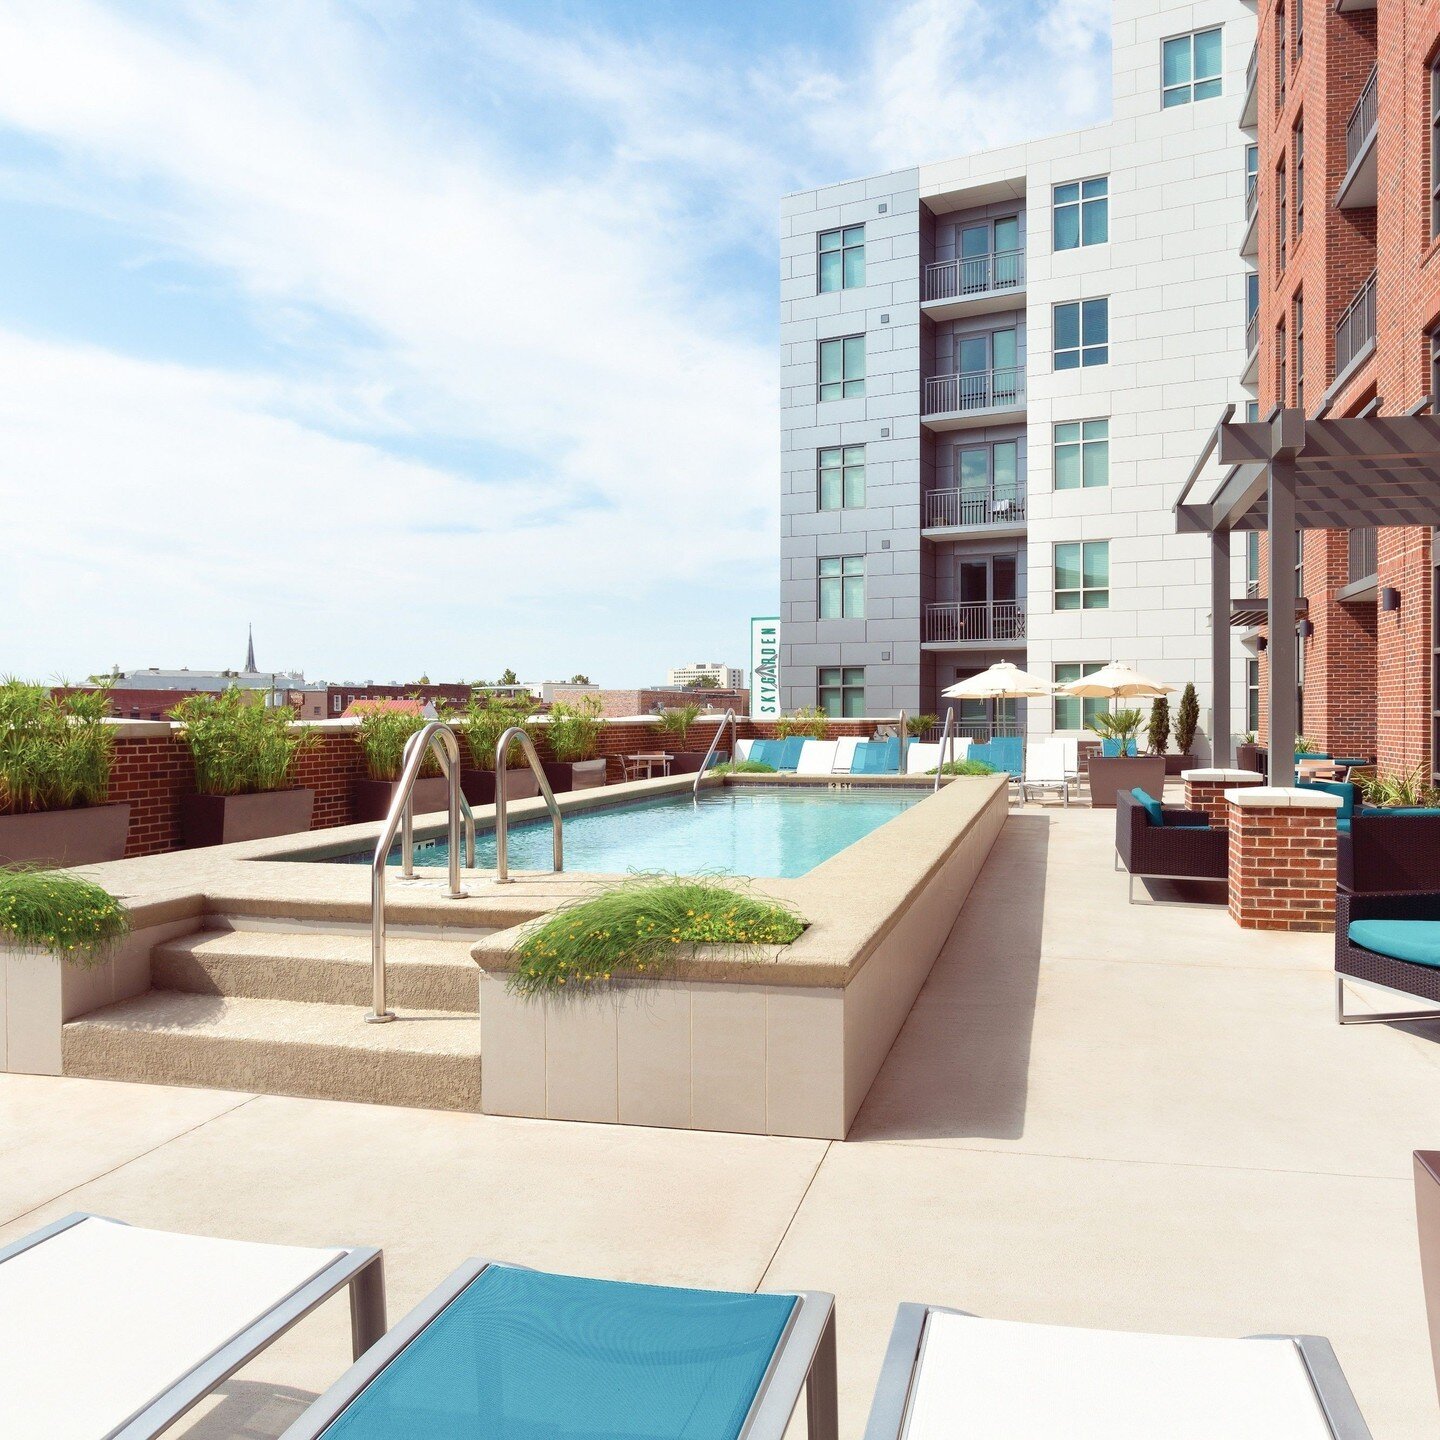 We're excited to announce that SkyGarden Apartments in Charleston, SC was ranked 28th amongst the top 100 student housing properties in the nation by J Turner Research!👏🏻 ⁠
⁠
Congratulations to the @skygardenapts team and their efforts to continue 